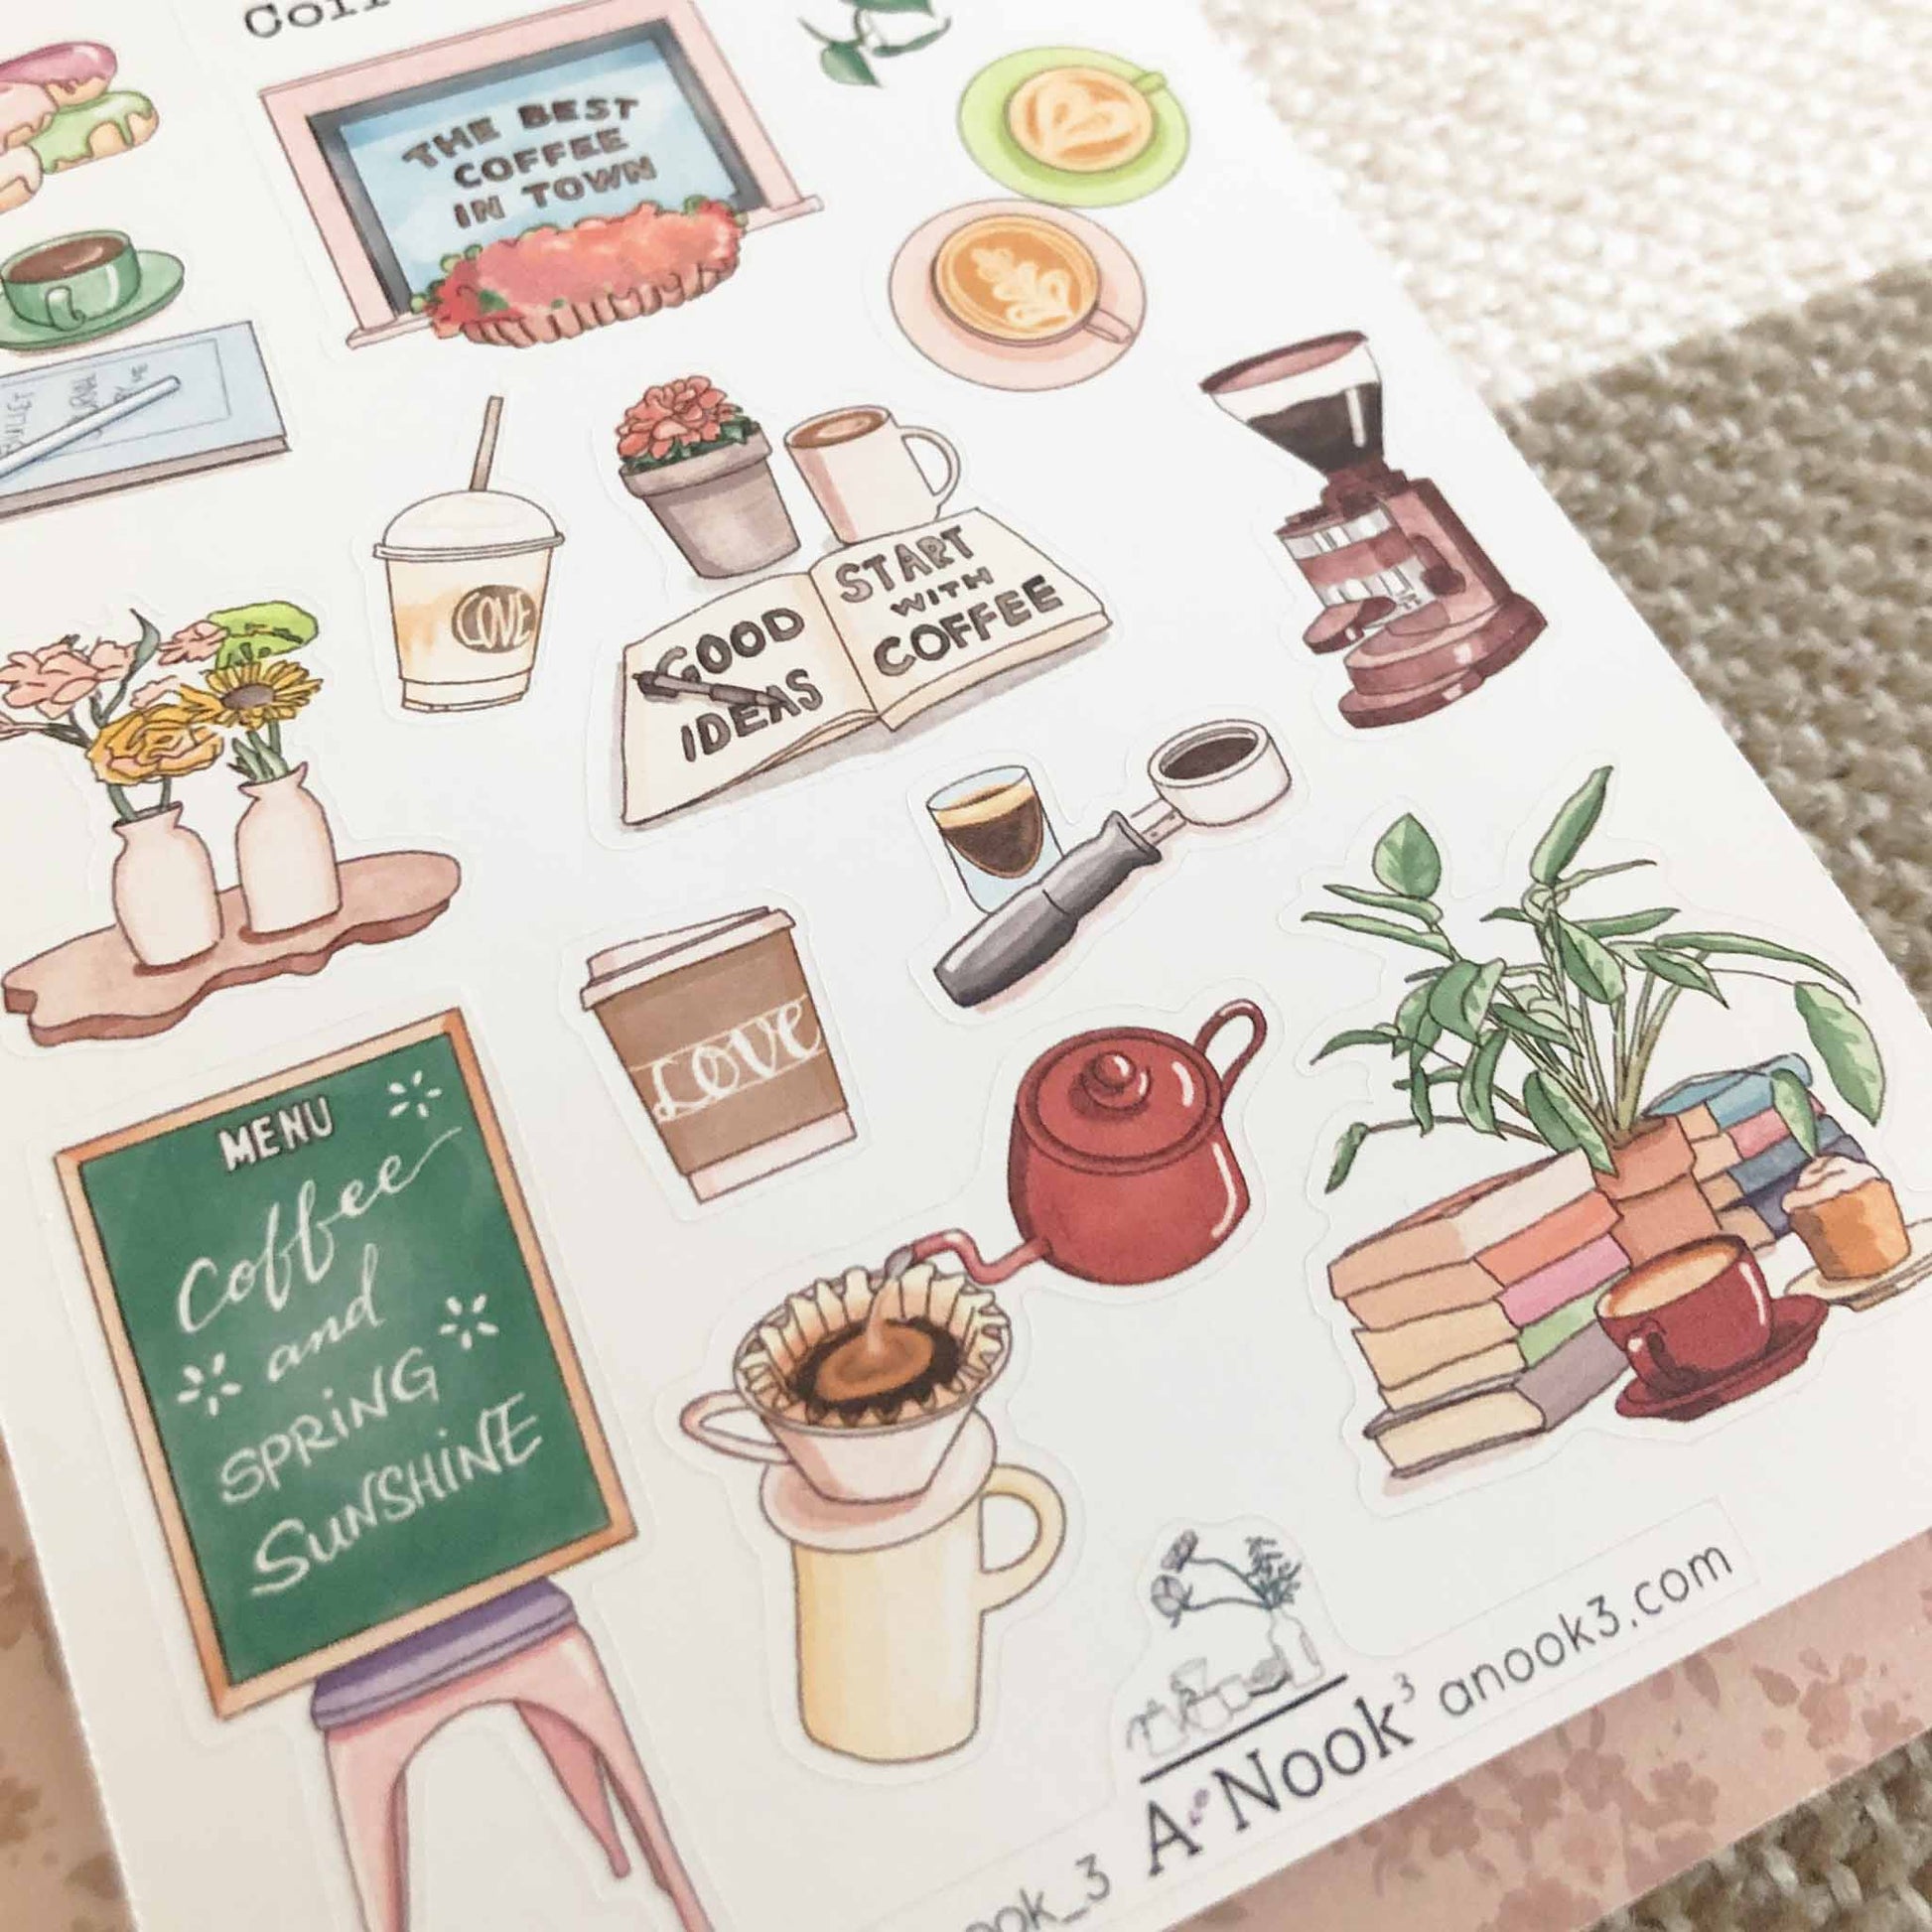 Bullet Journal Weekly Stickers | Peach Weekly BUJO Stickers Sticker for  Sale by Rylee Autumn